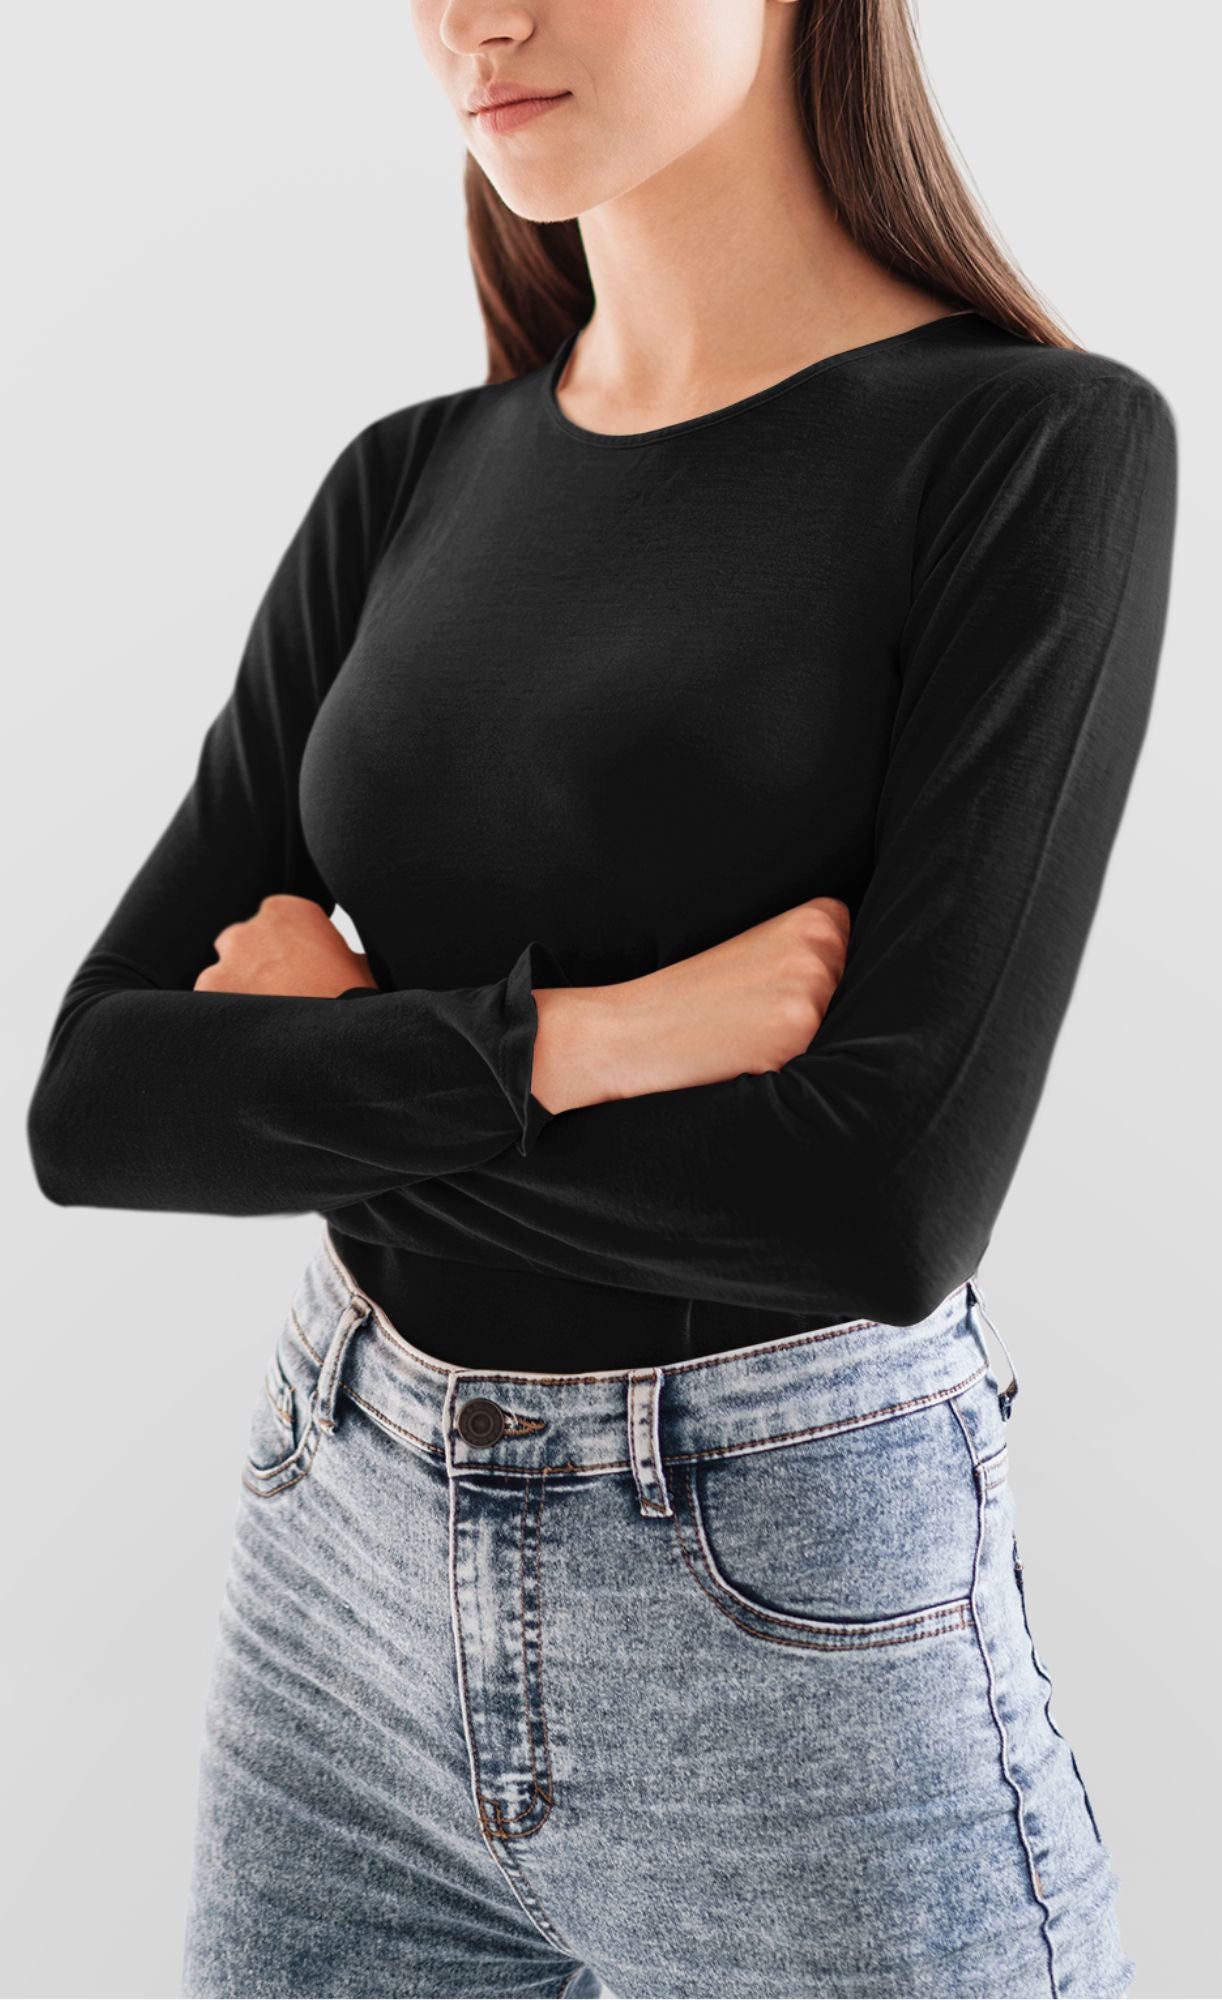 Classic Long Sleeve T-Sirt Black Soft and Flattering